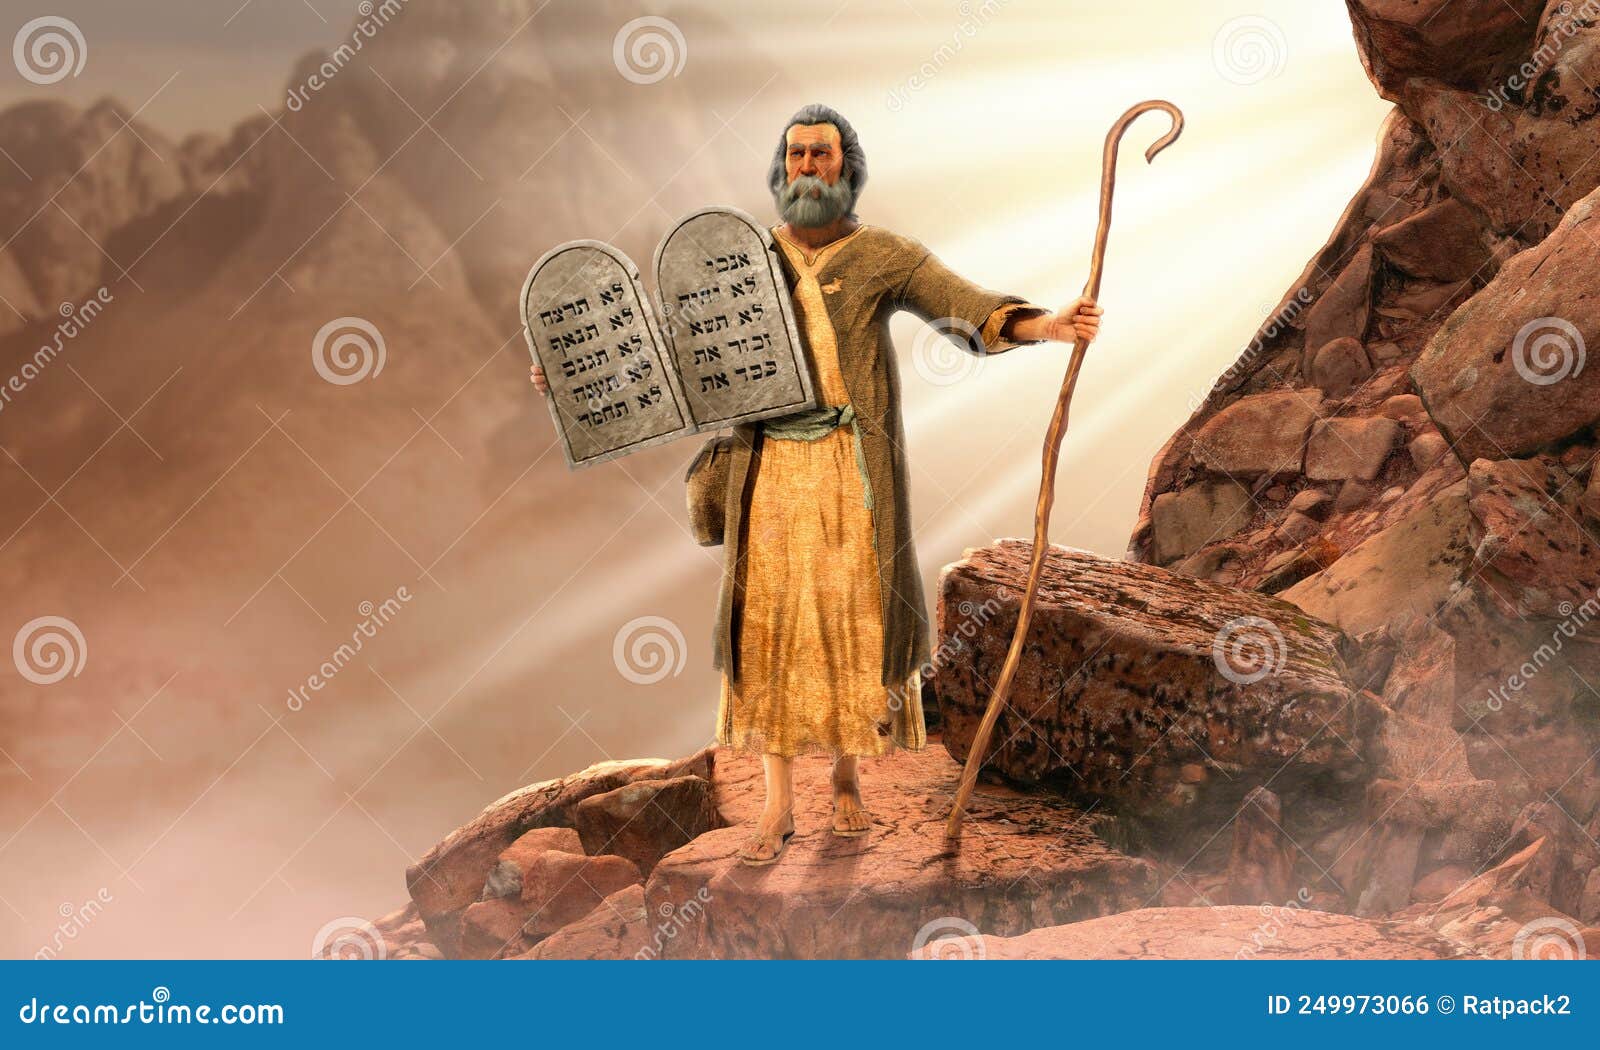 moses holding 10 commandments tablets coming down  mount sinai